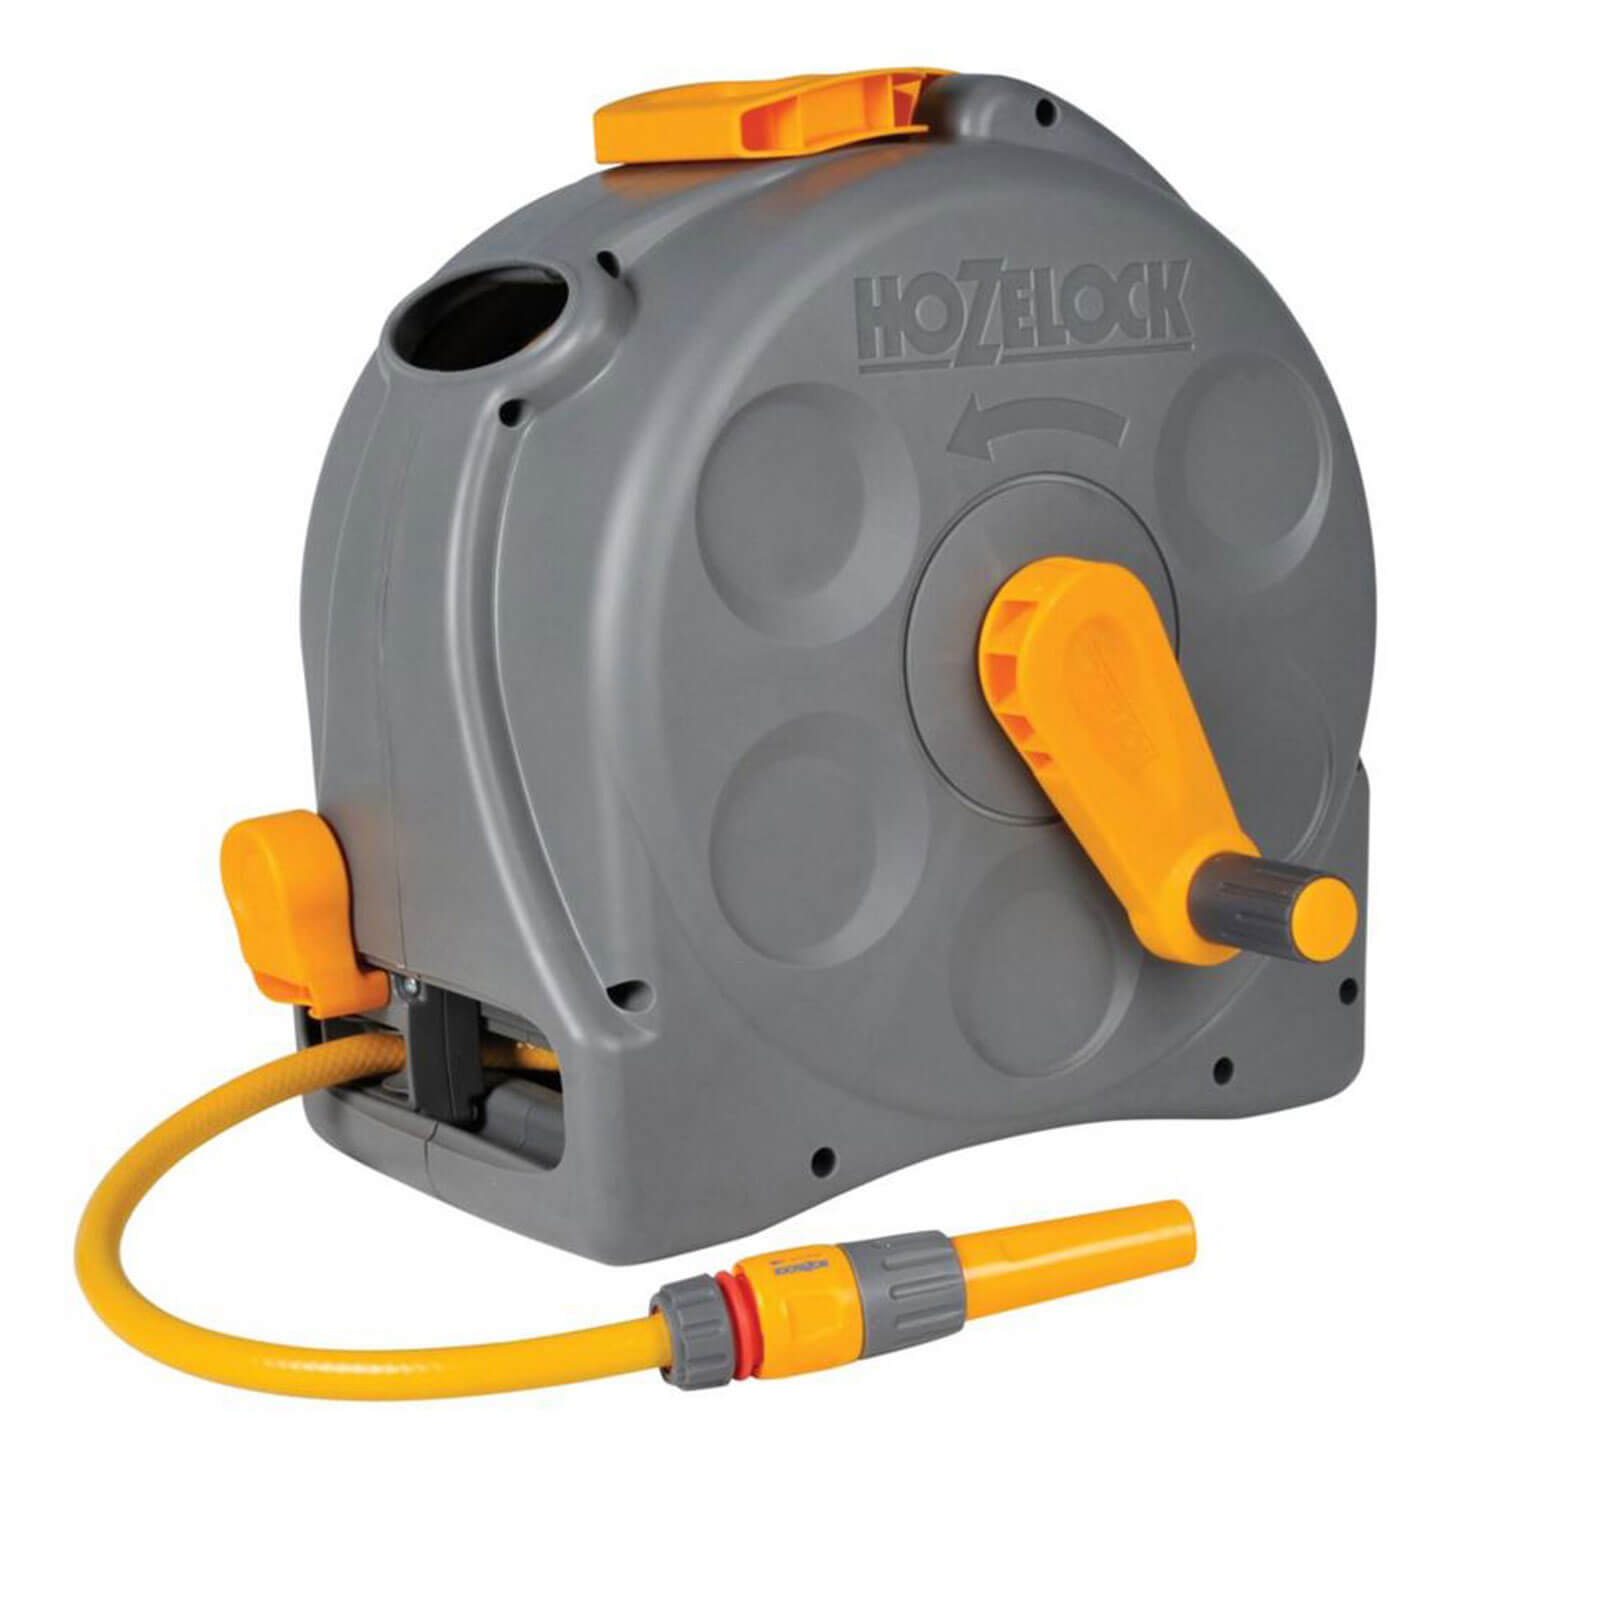 Image of Hozelock Compact Enclosed Floor and Wall Mounted Hose Reel 1/2" / 12.5mm 25m Grey & Yellow